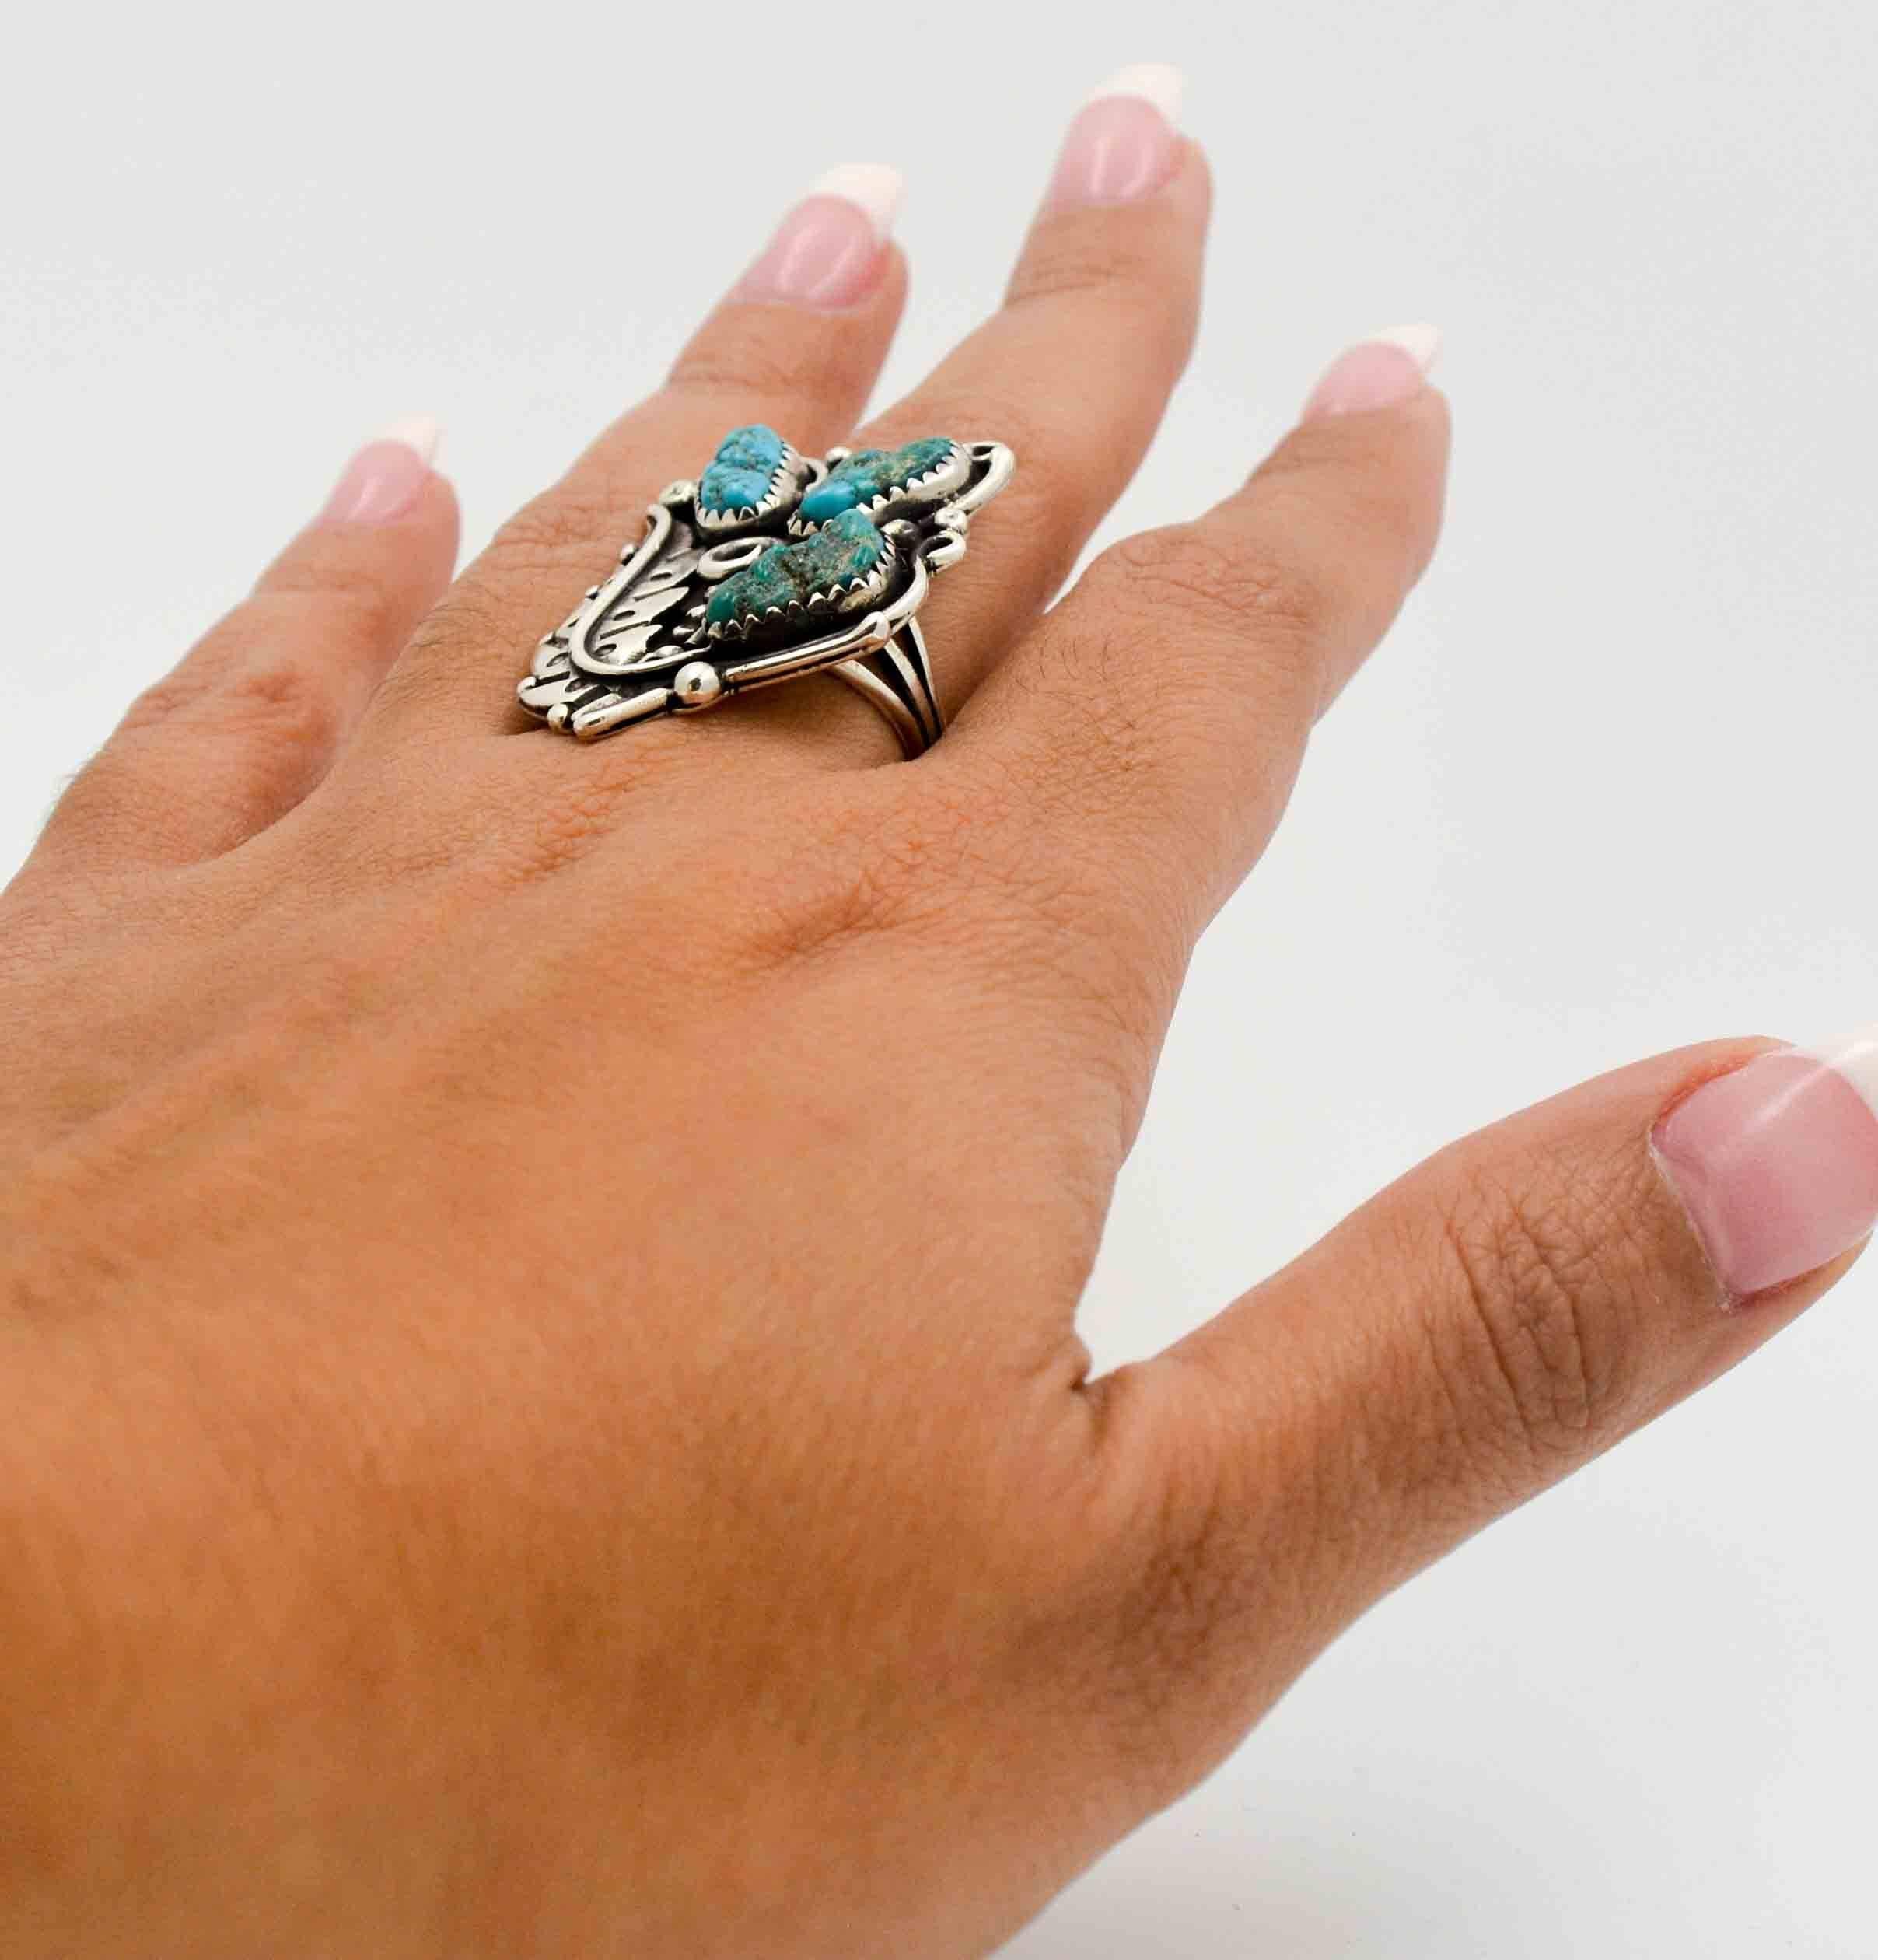 This classic Native American style ring is hand made from sterling silver and turquoise.  The three turquoise used are of a strong blue color and are bezel set.  The silversmith that hand made this ring artfully surrounded the turquoise with